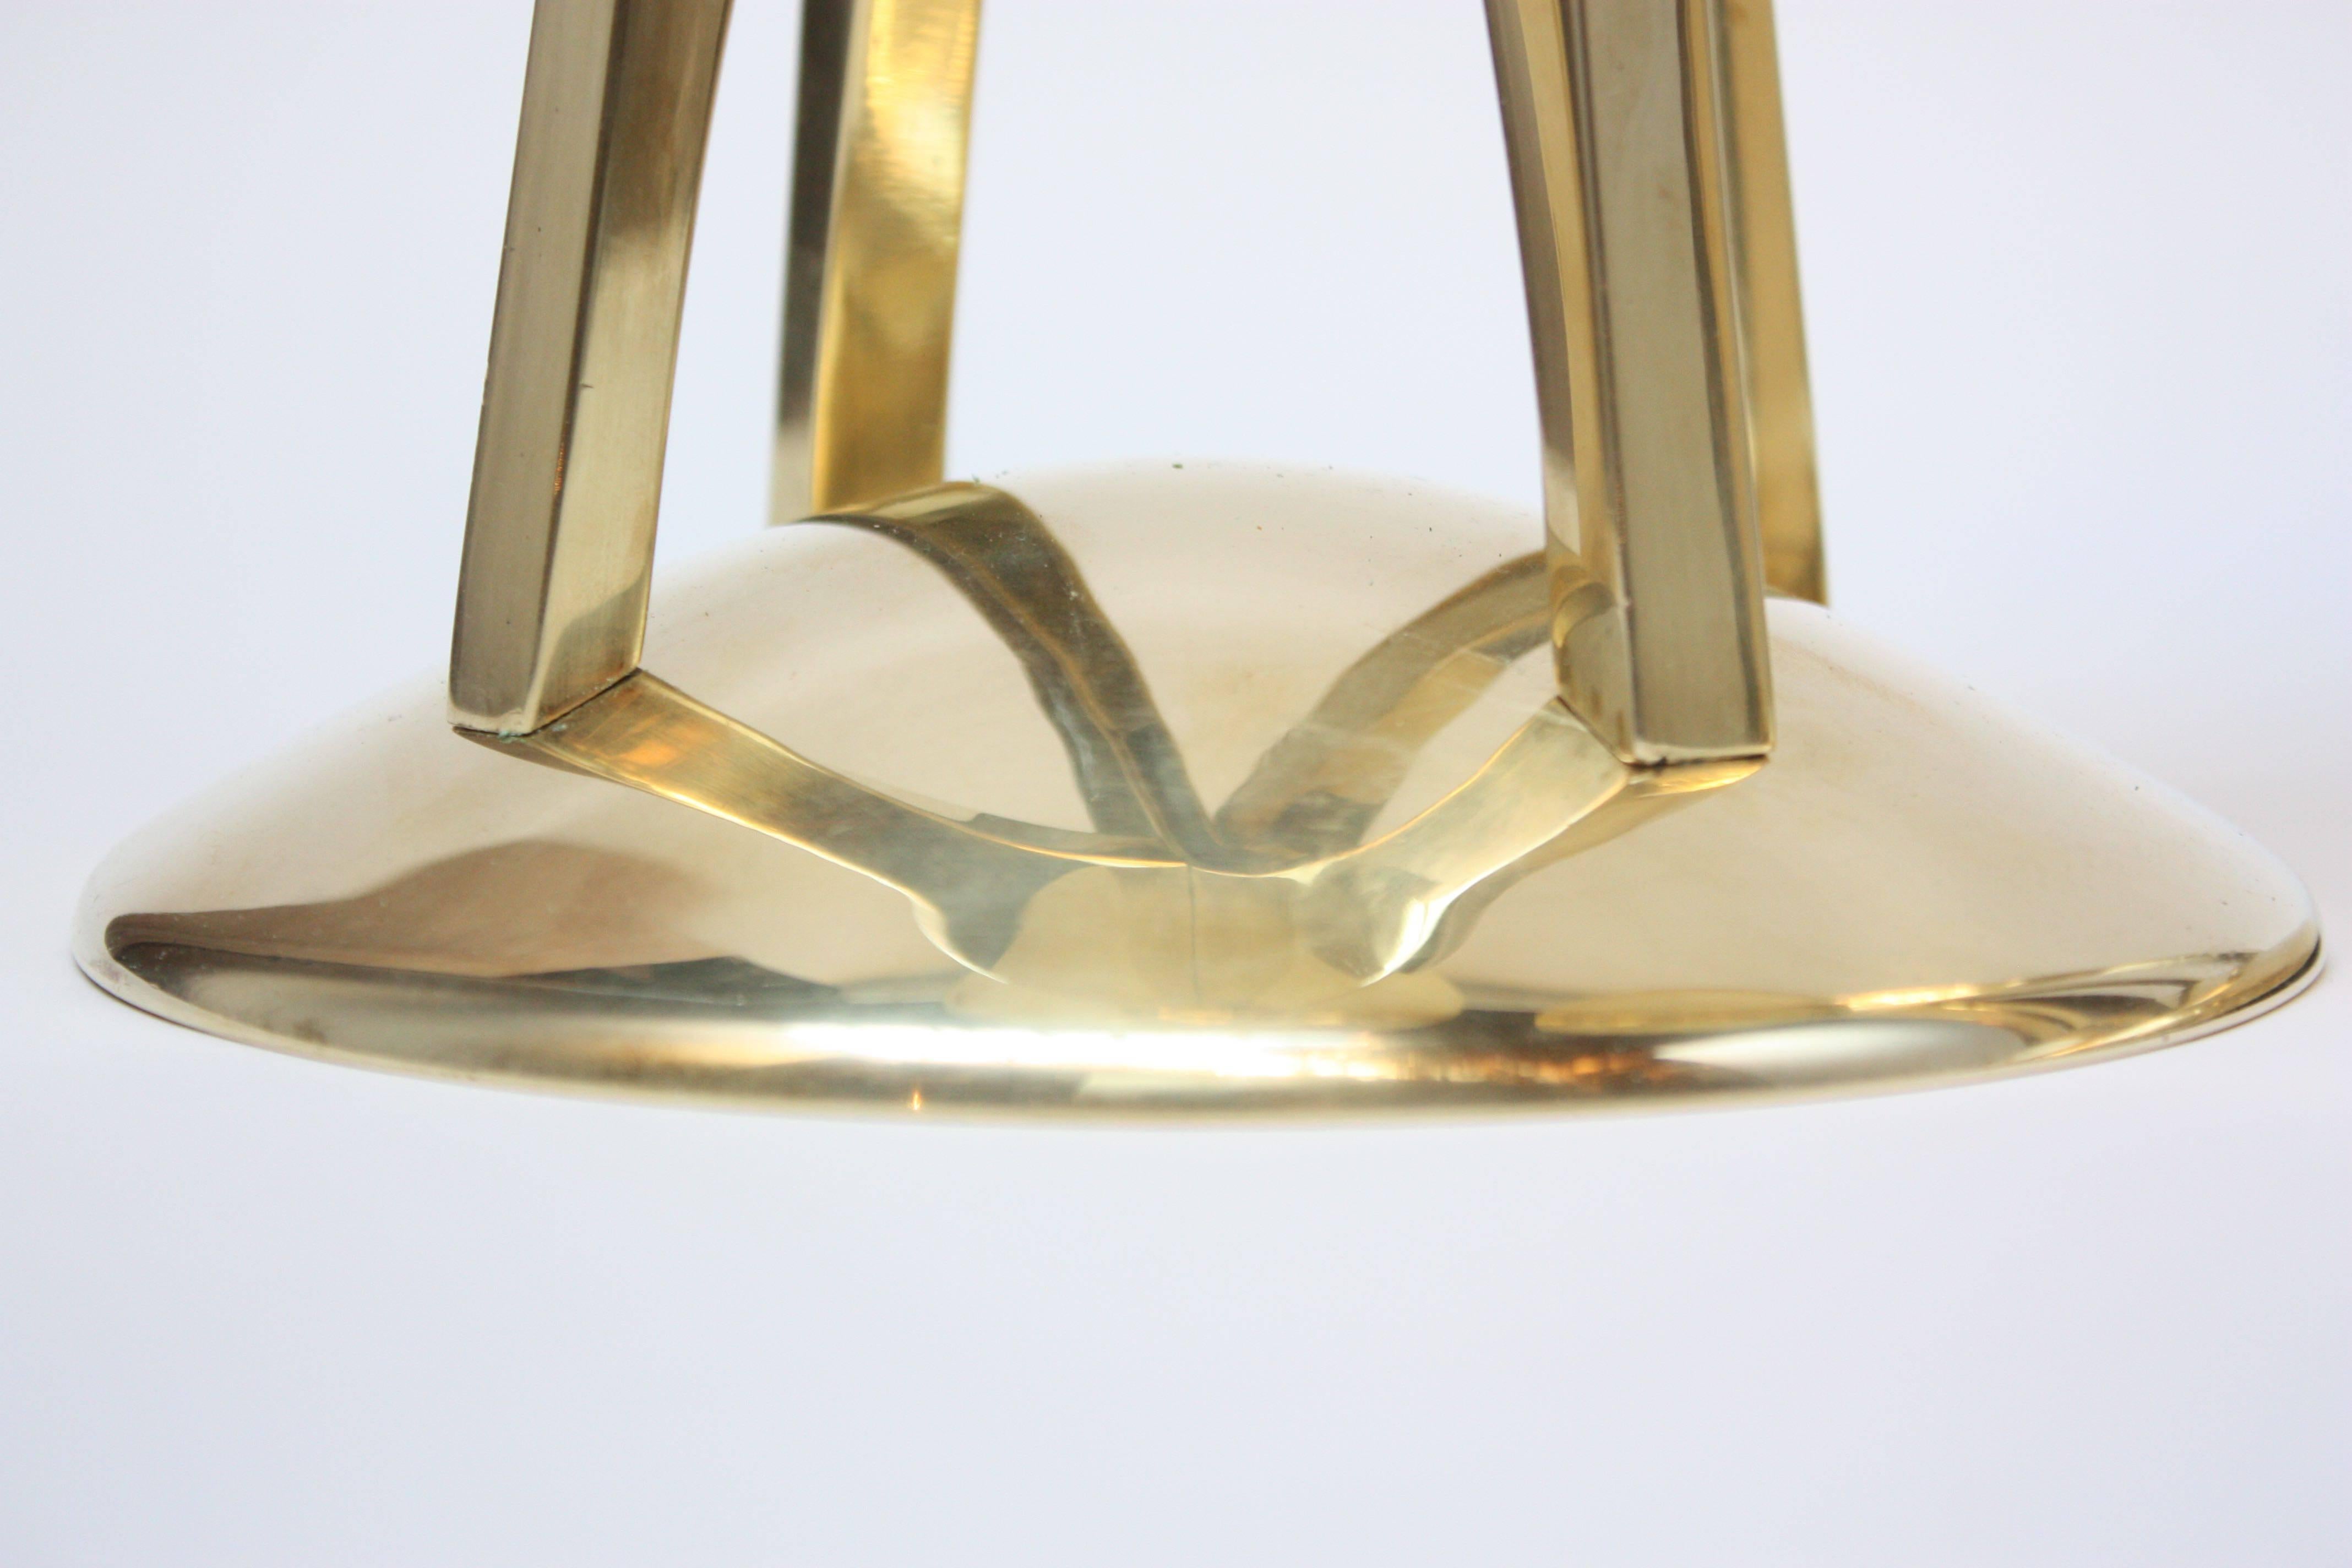 Polished Pair of Large Mid-Century Modern Brass Candlesticks